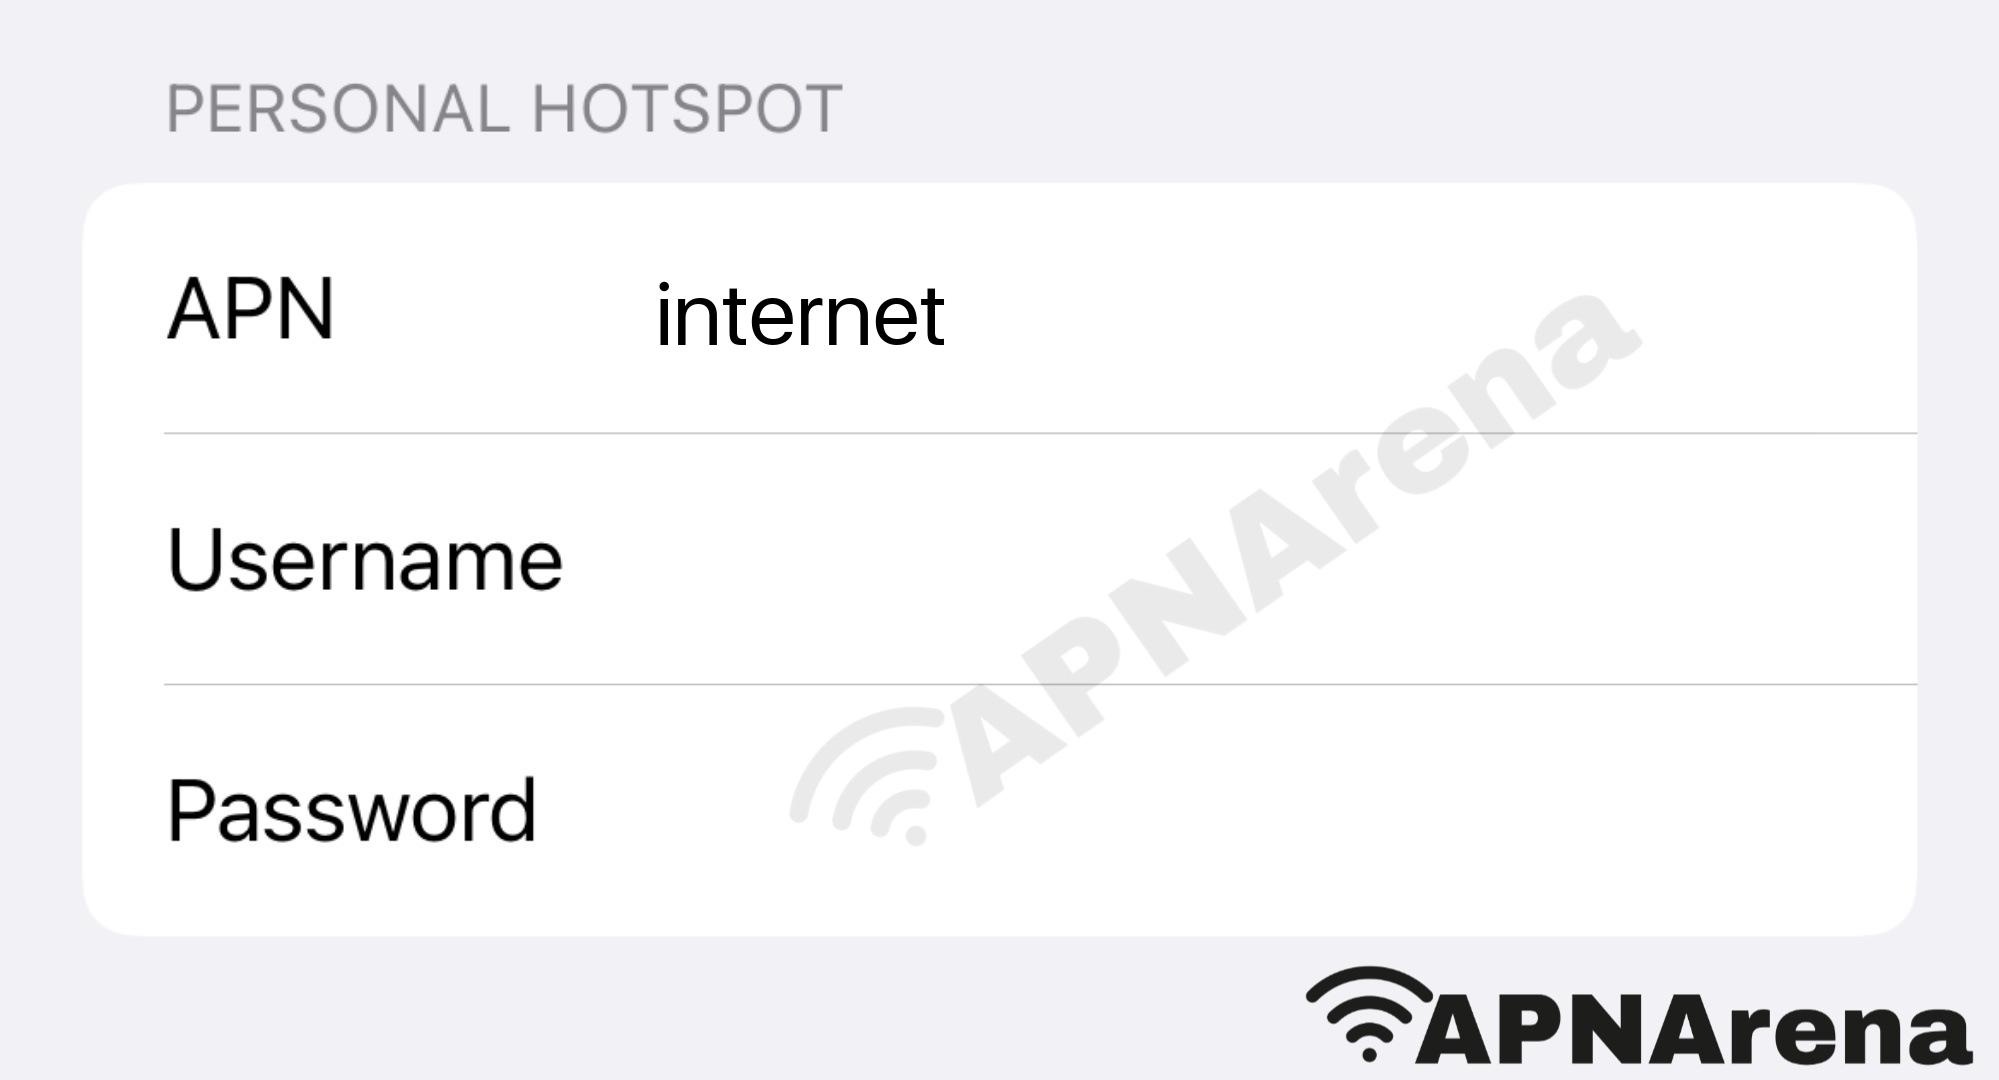 Ncell Personal Hotspot Settings for iPhone